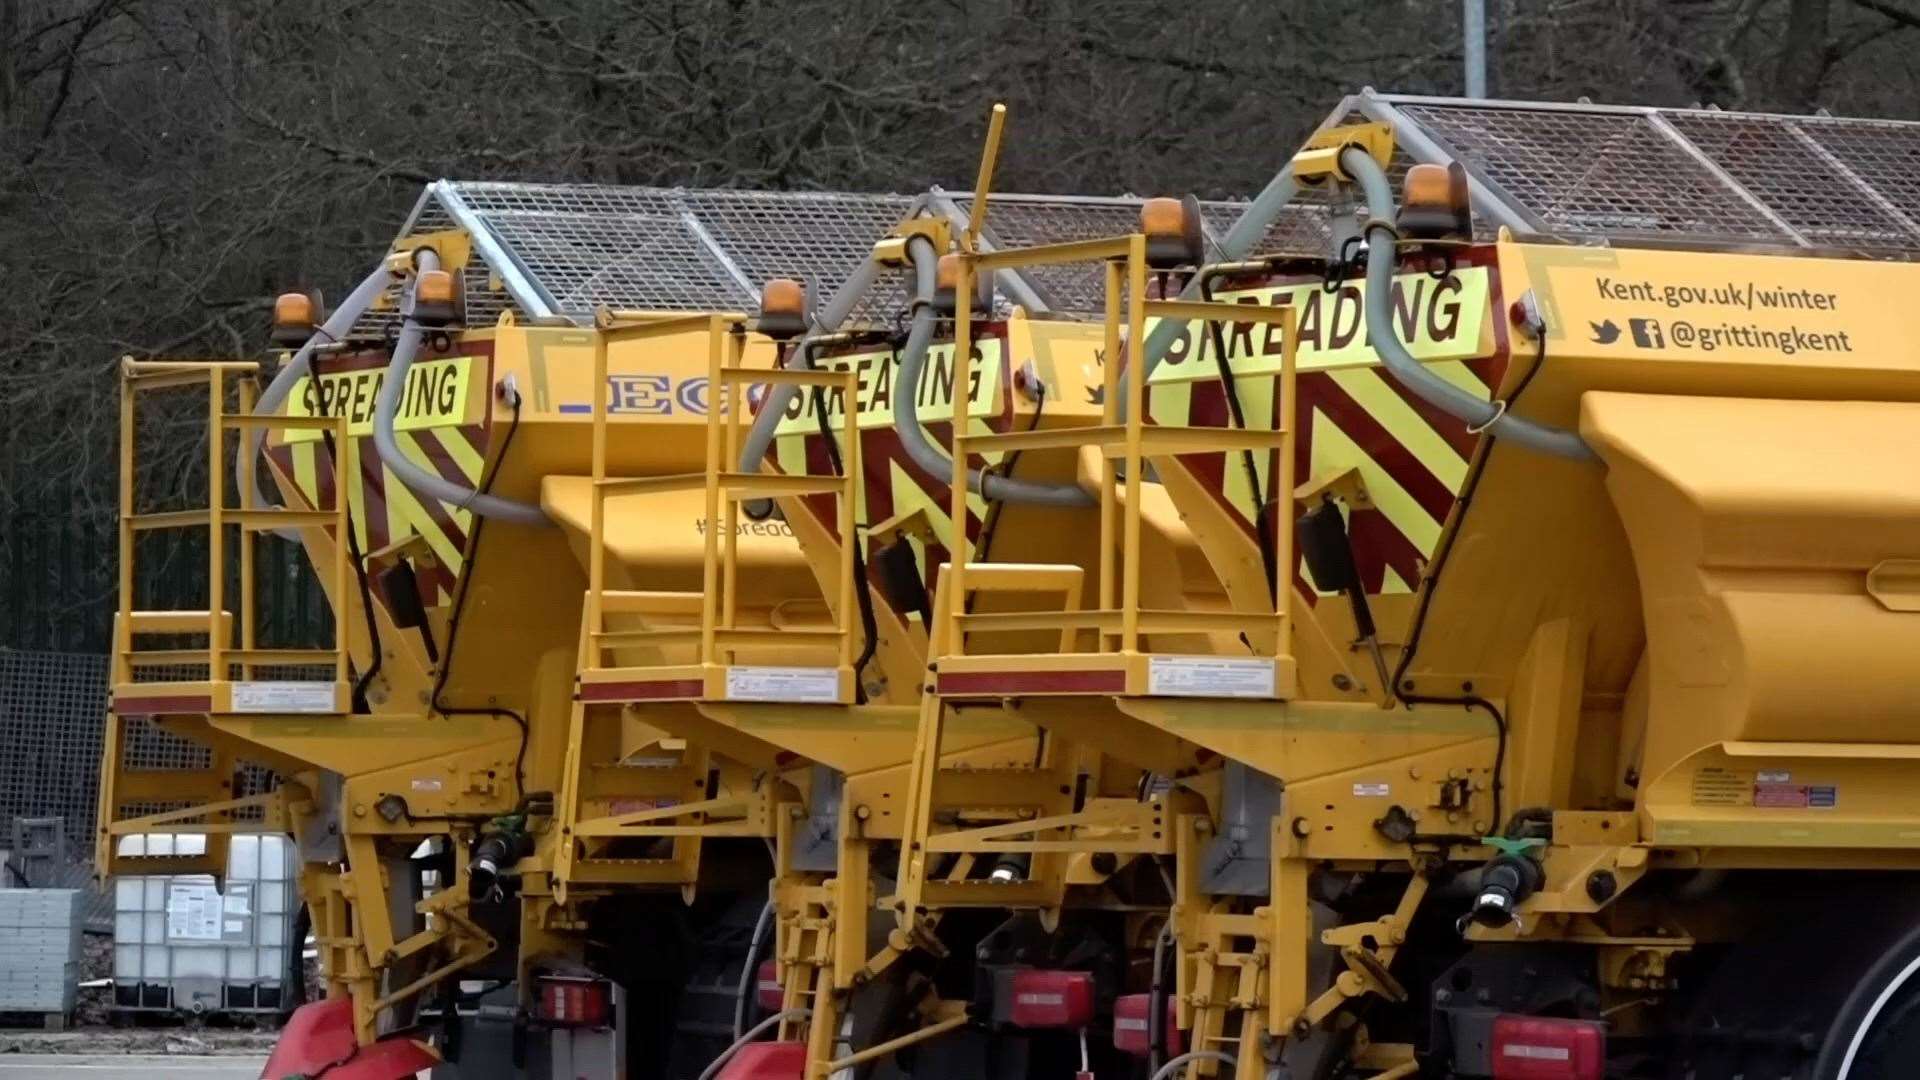 Kent County Council gritters will be out tonight